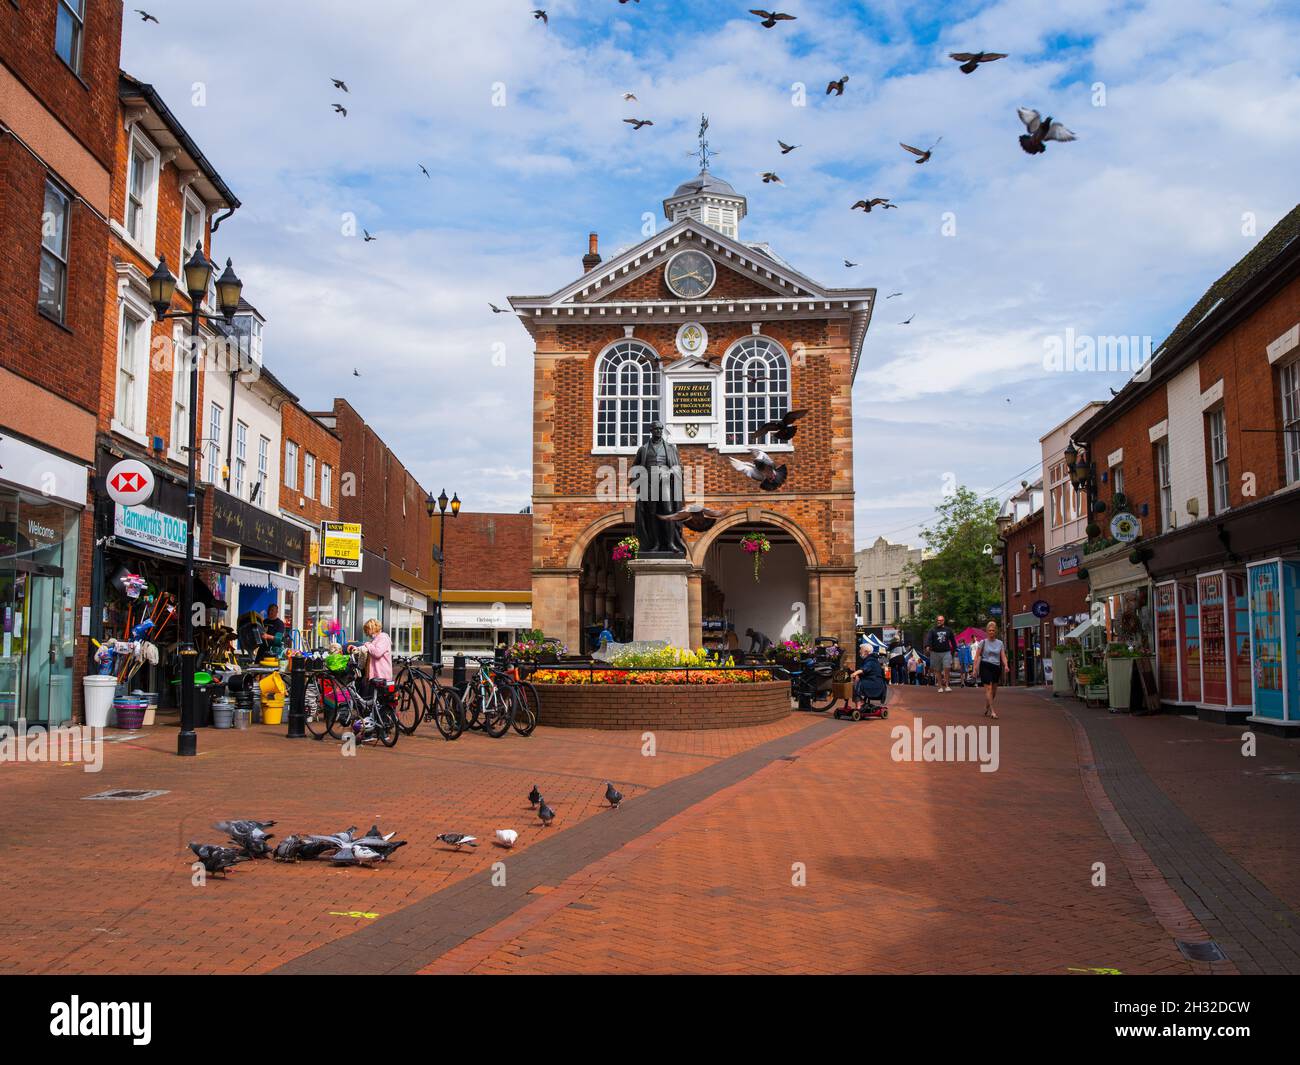 TAMWORTH, UNITED KINGDOM - Sep 22, 2021: A shot of people and pigeons at Tamworth Town Hall in Tamworth, Staffordshire, England, UK Stock Photo